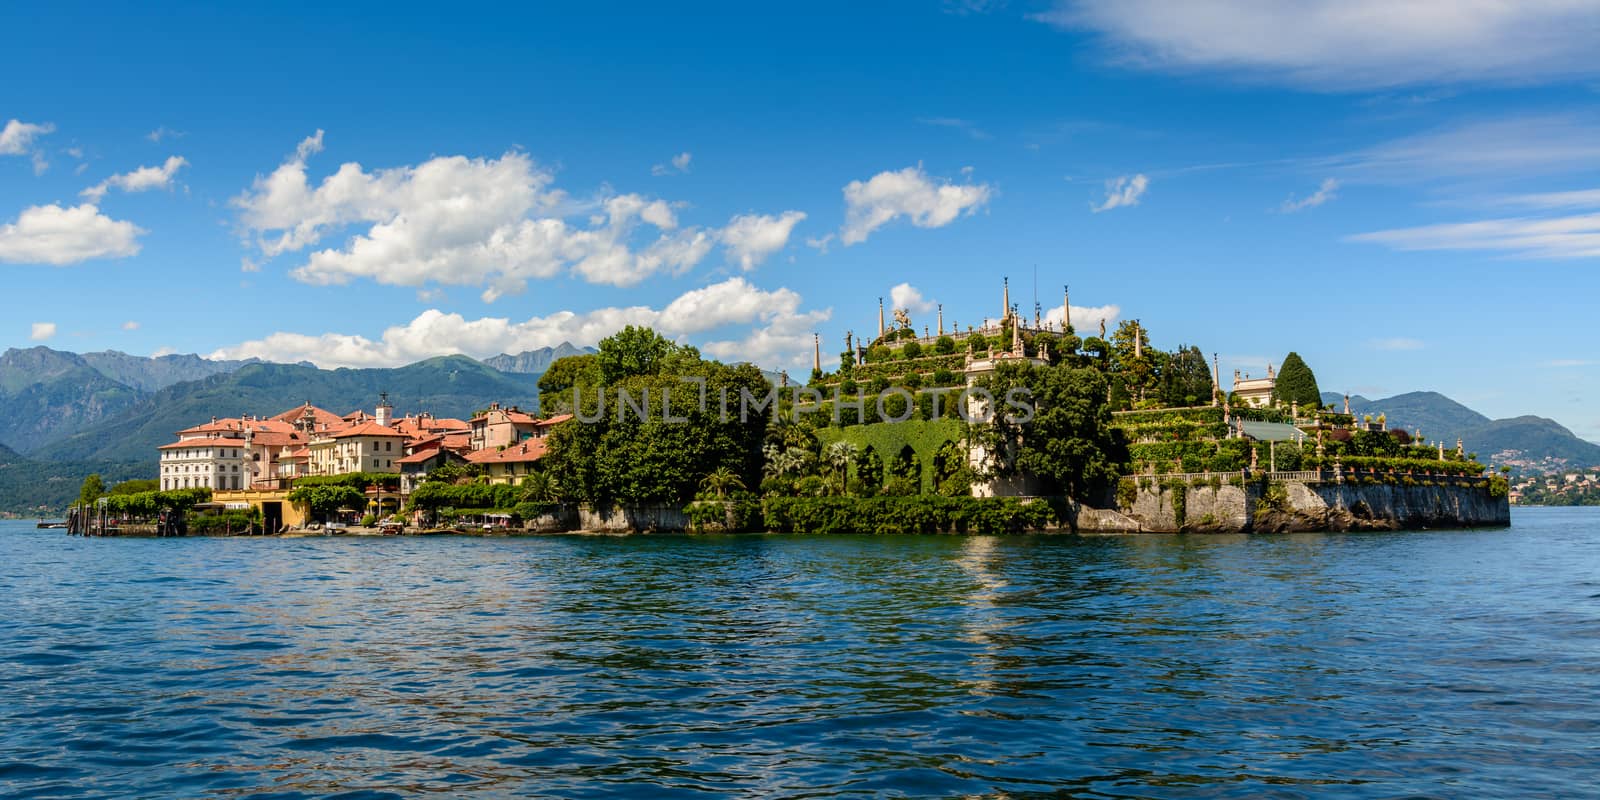 Isola Bella is located in the middle of Lake Maggiore you can get with liners or private just 5 minutes off the town of Stresa. 
The island owes its fame to the Borromeo family who built a magnificent palace with a beautiful garden.